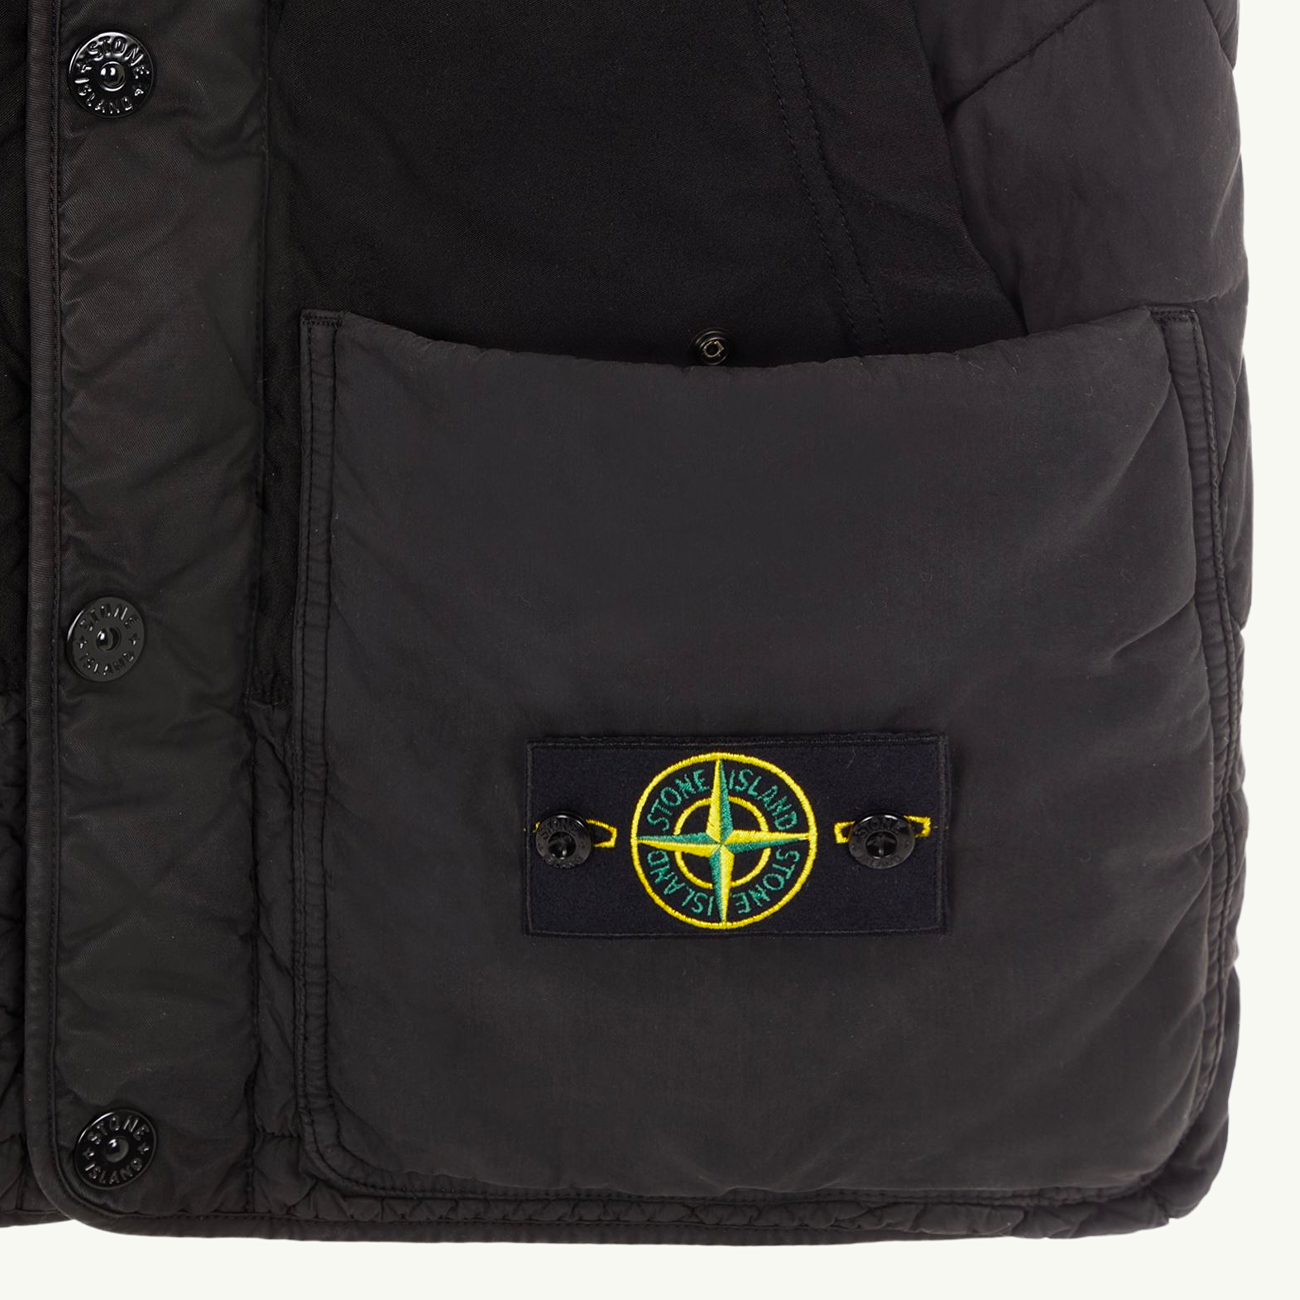 GILET QUILTED DOUBLE POCKET BLACK 2979